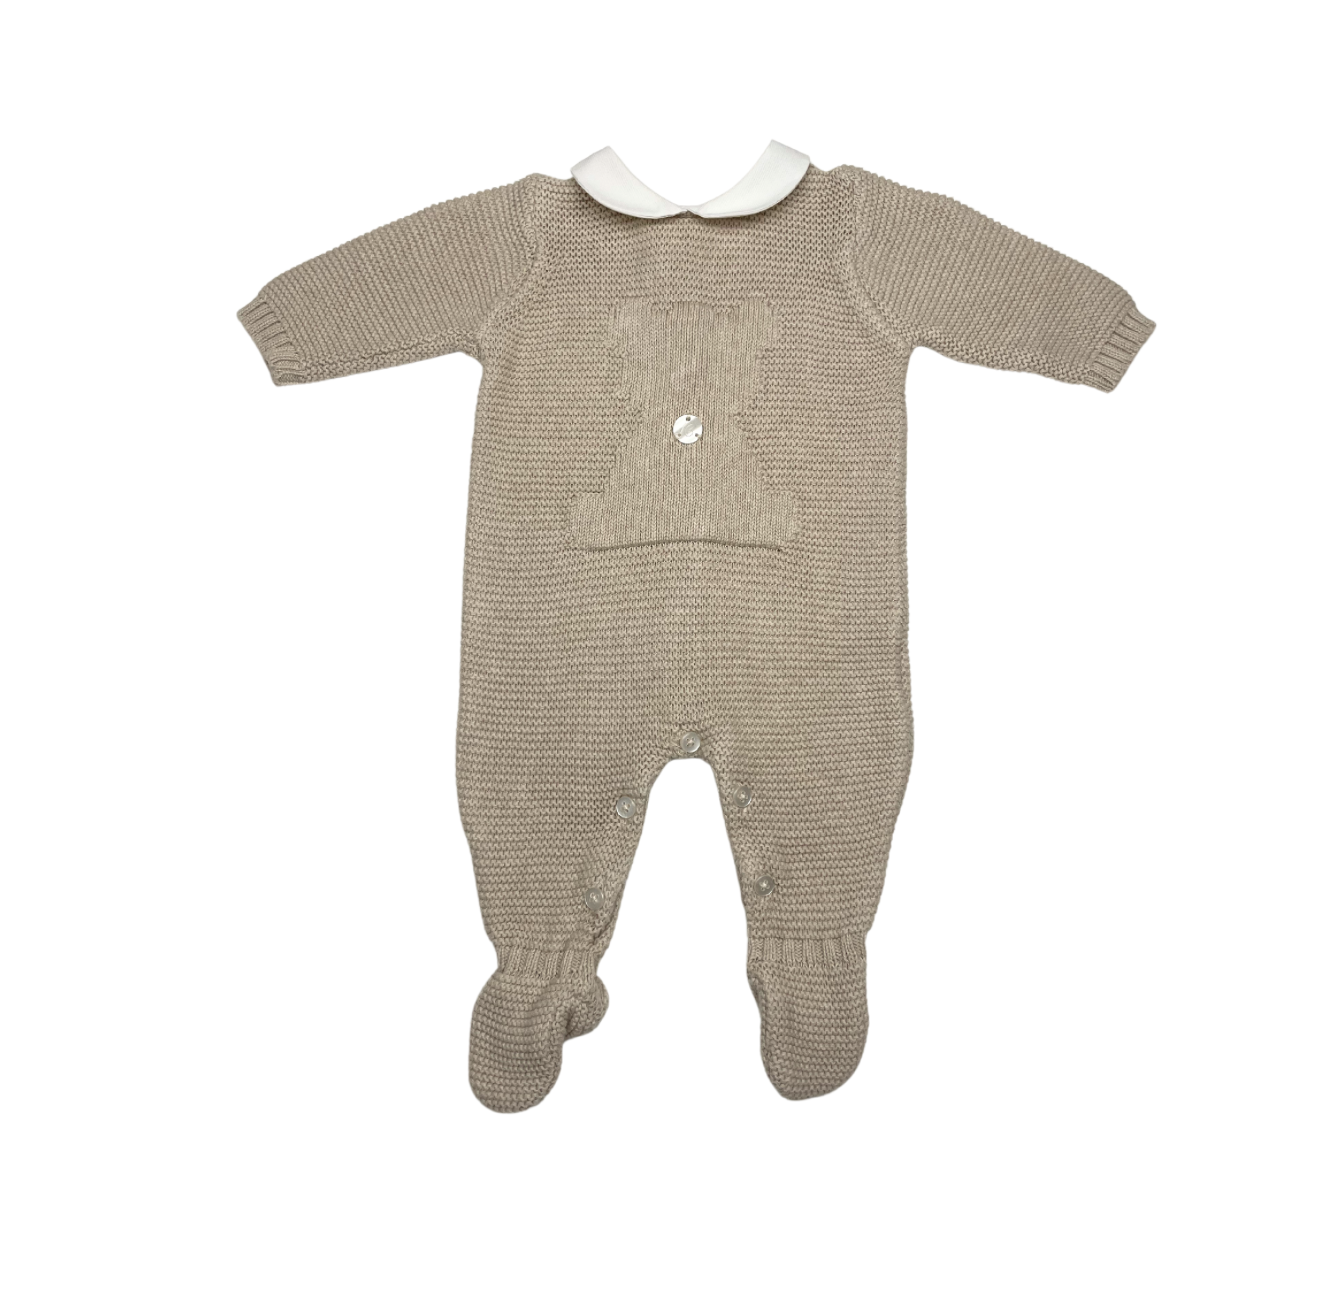 MY FIRST CHICCO - Combinaison beige - 1 mois